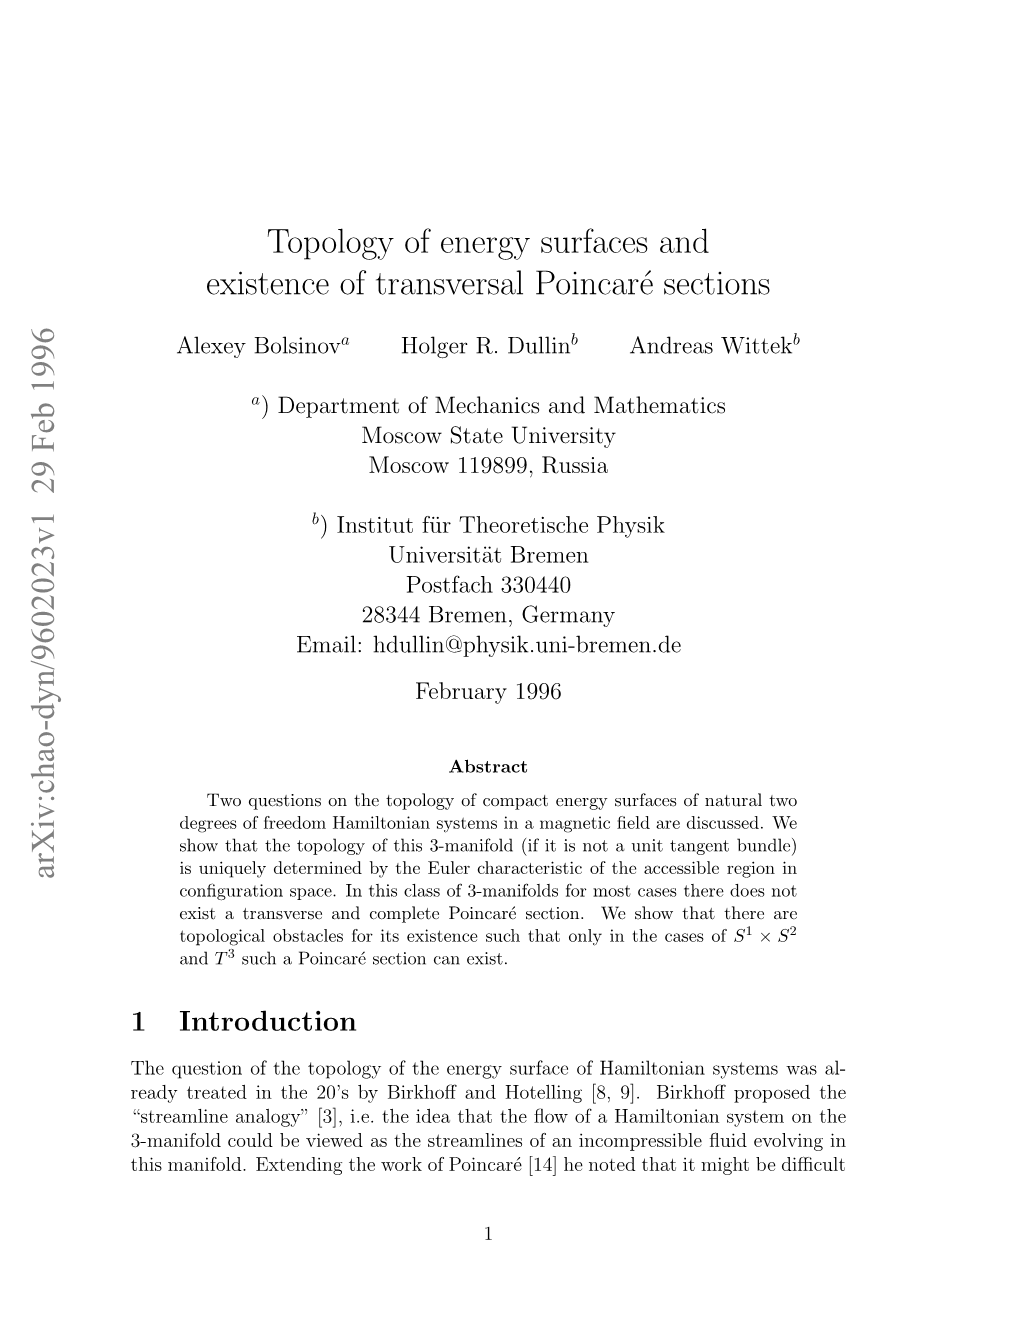 Topology of Energy Surfaces and Existence of Transversal Poincaré Sections